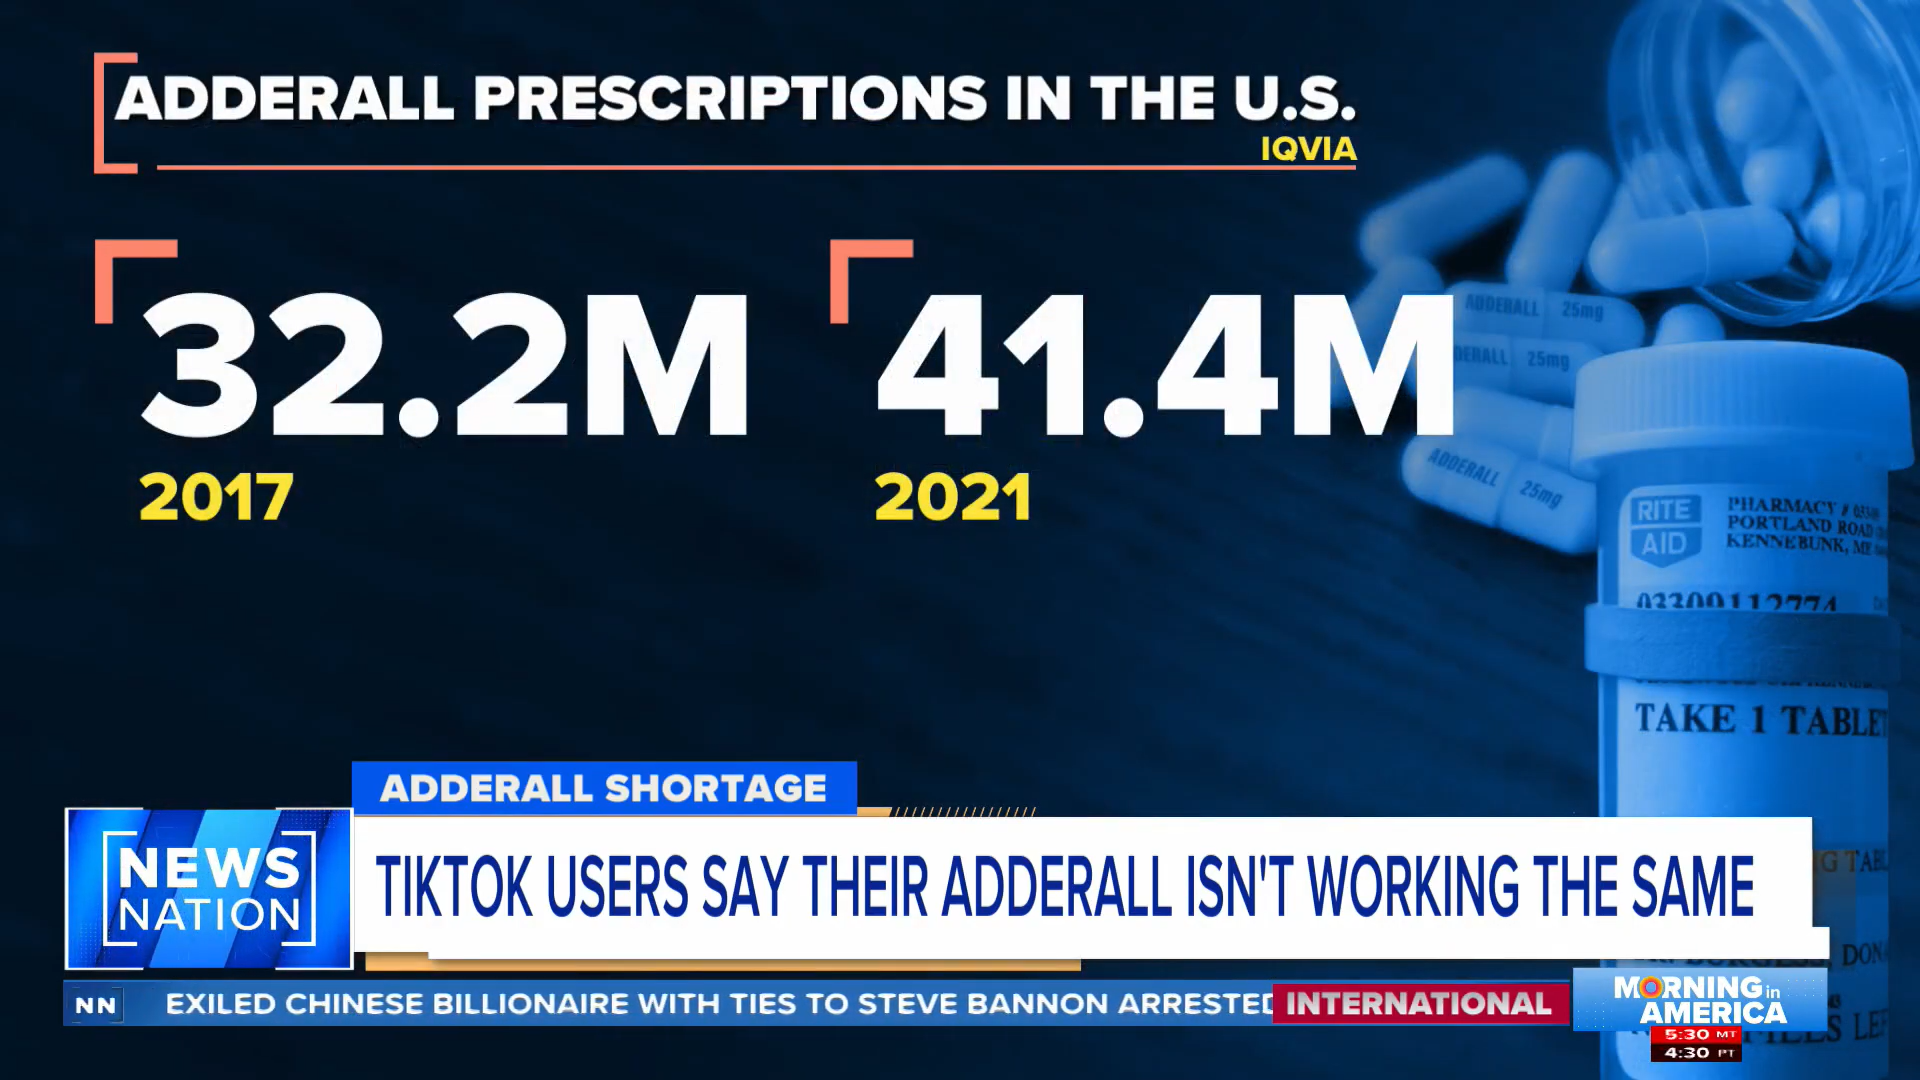 Adderall shortage continues, some say medication not working The